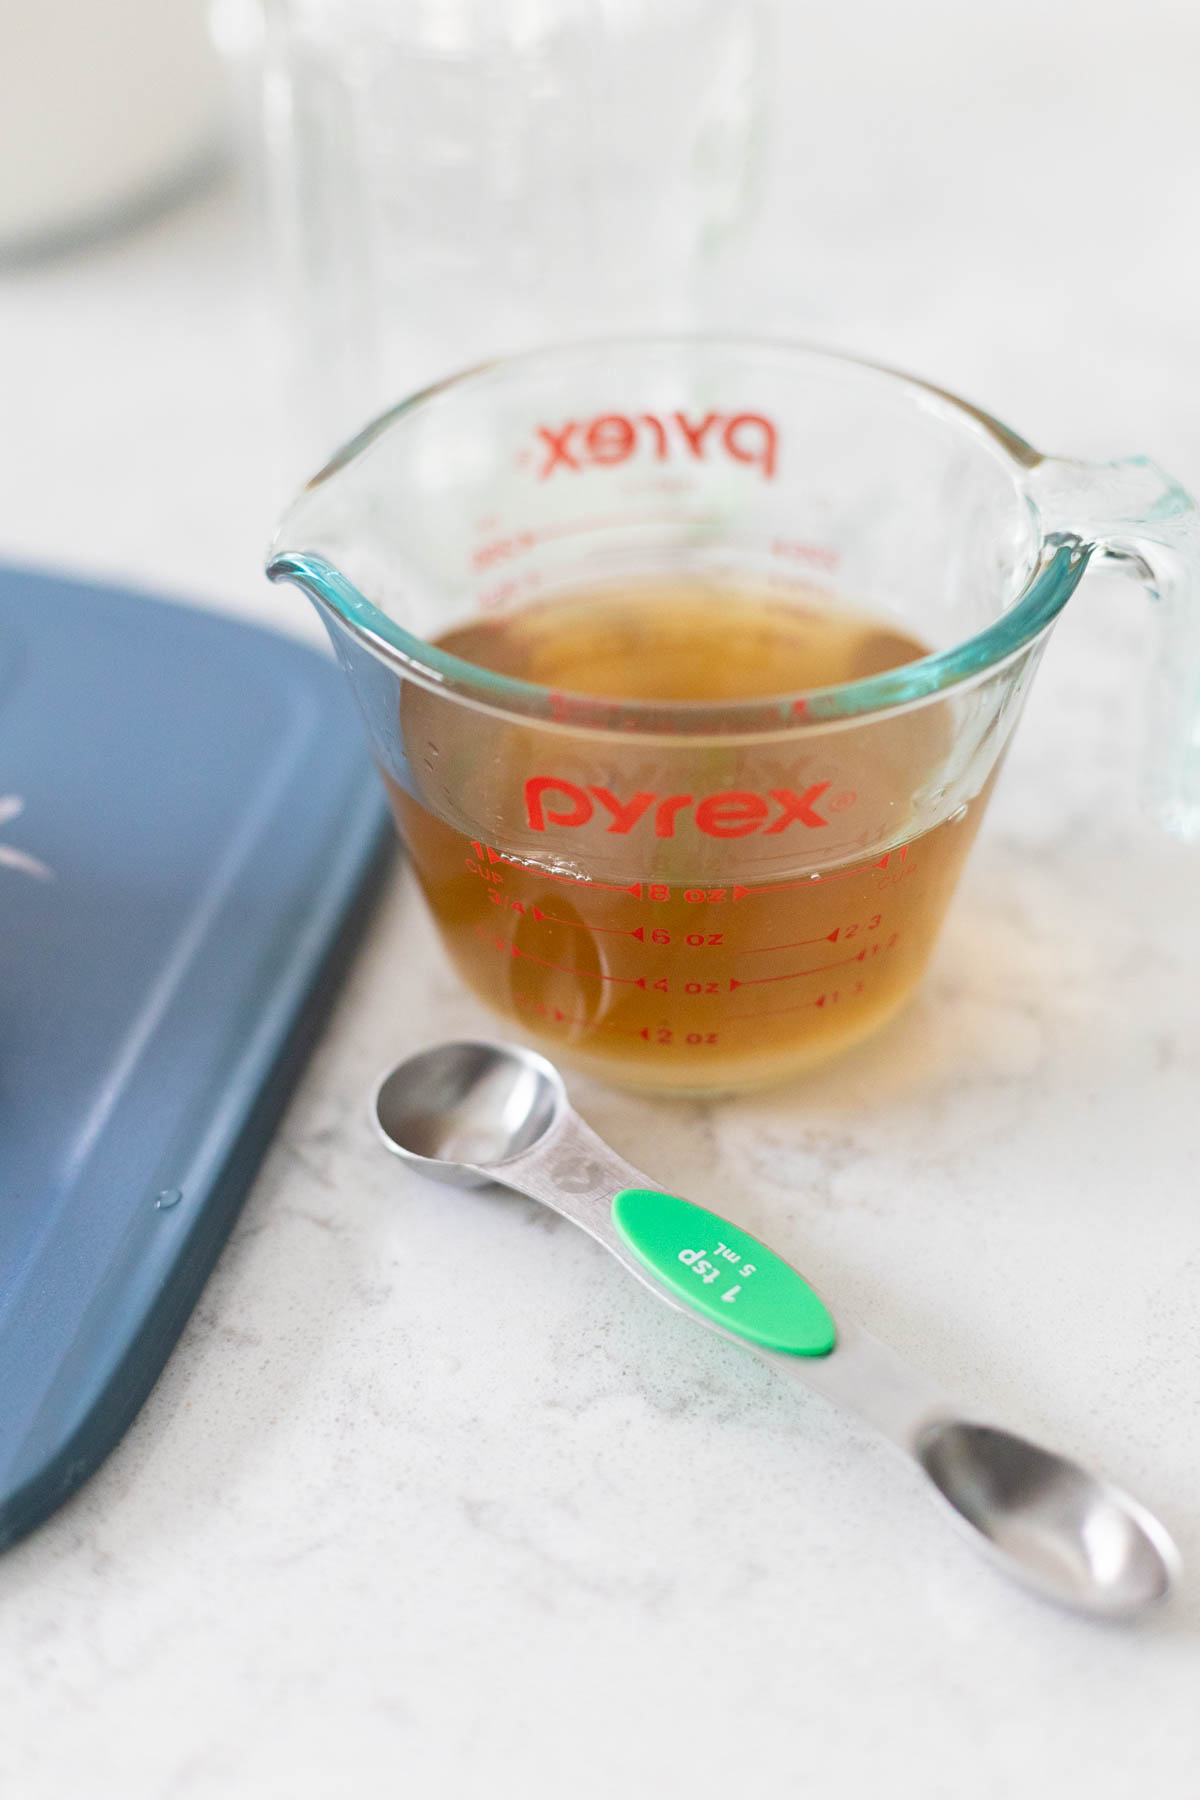 A measuring cup of vinegar has a measuring spoon on the side.